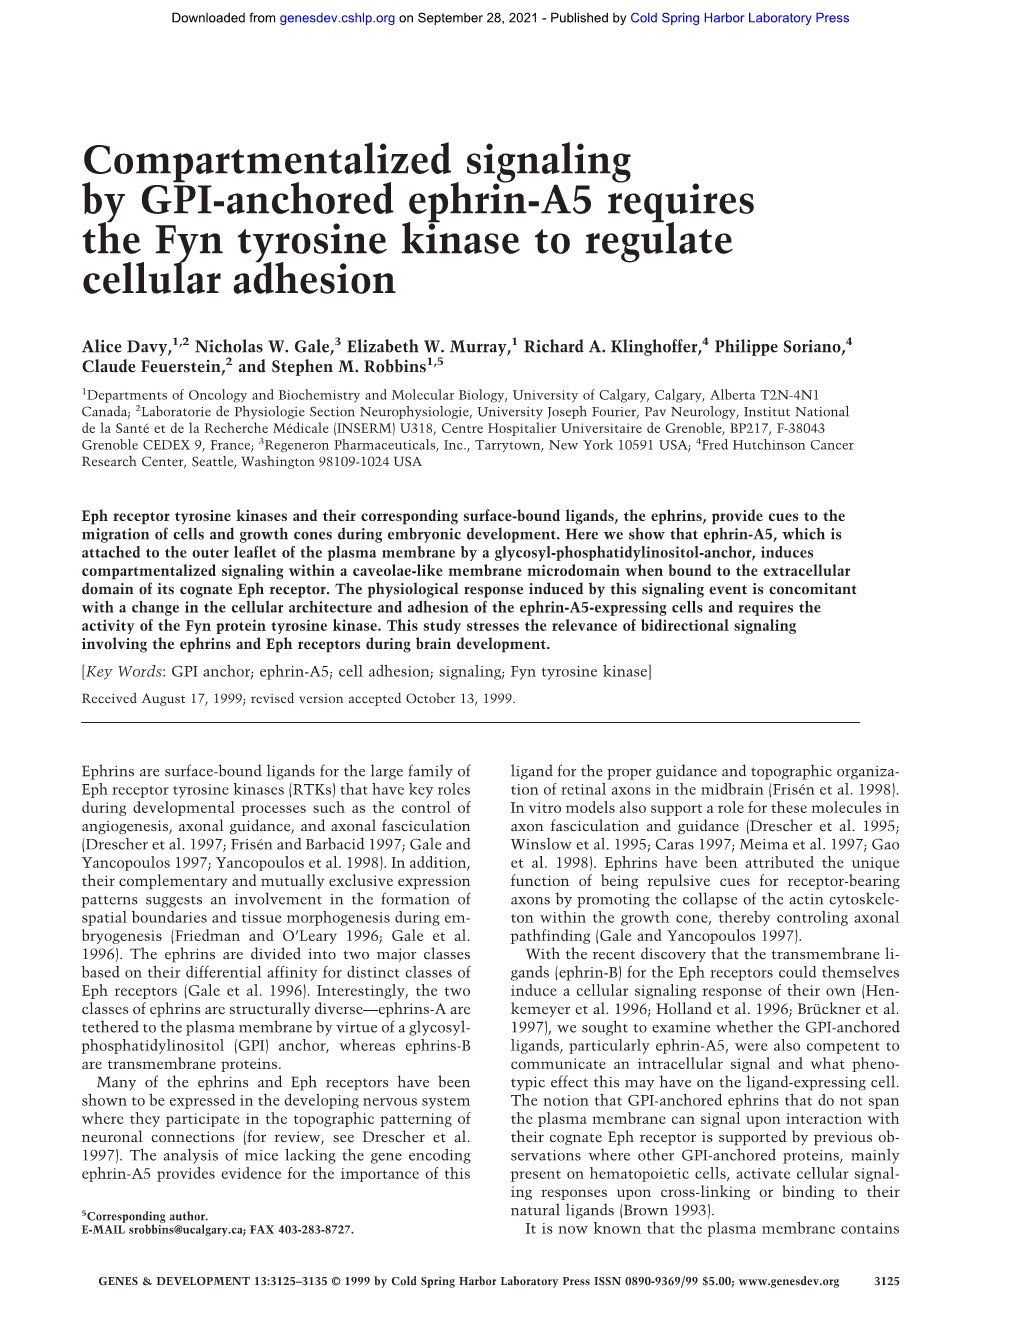 Compartmentalized Signaling by GPI-Anchored Ephrin-A5 Requires the Fyn Tyrosine Kinase to Regulate Cellular Adhesion